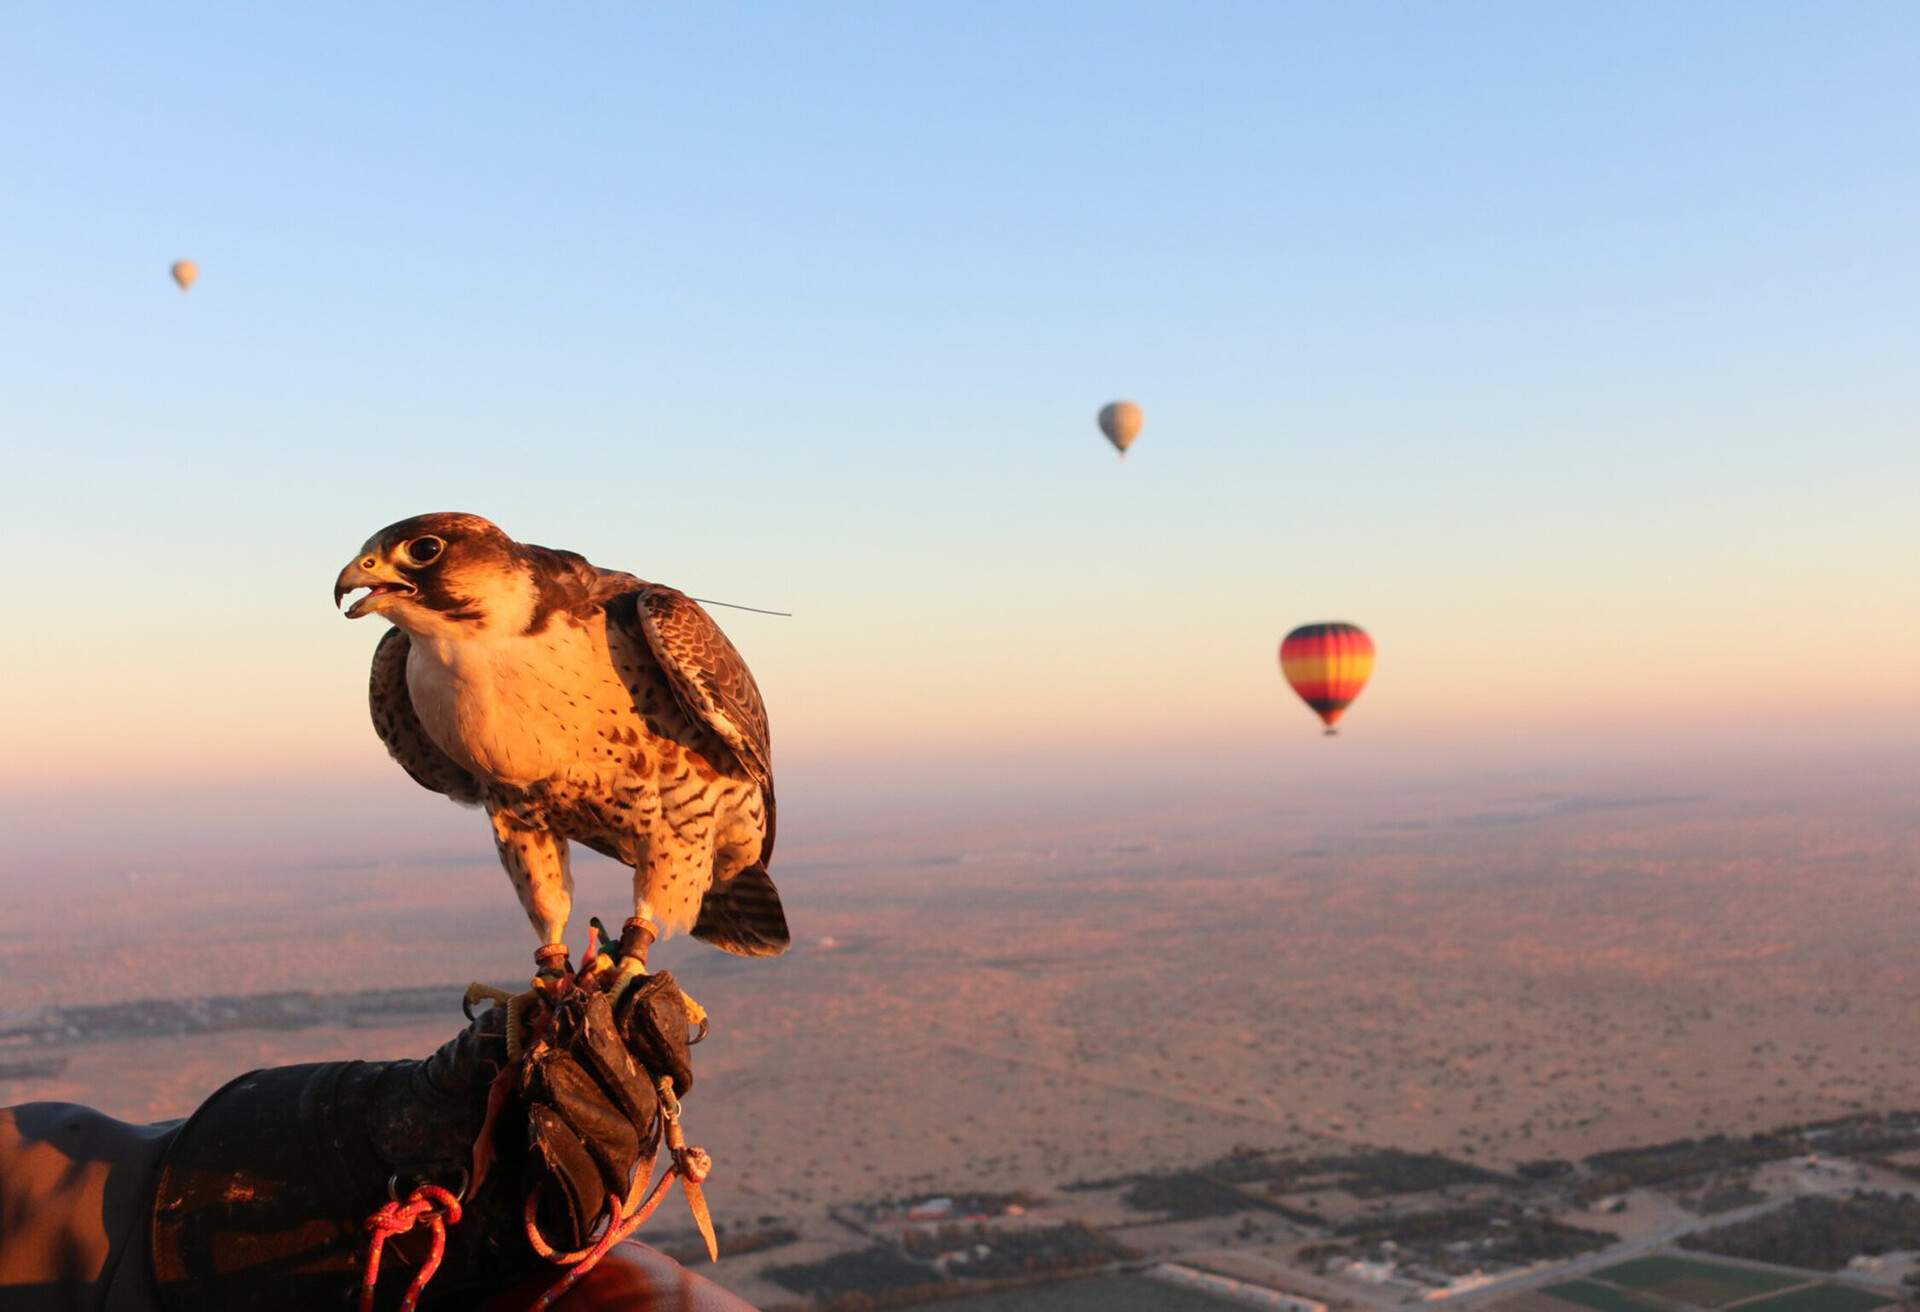 A falcon up in the air with tree hot air balloon in the background in a desert in Dubai